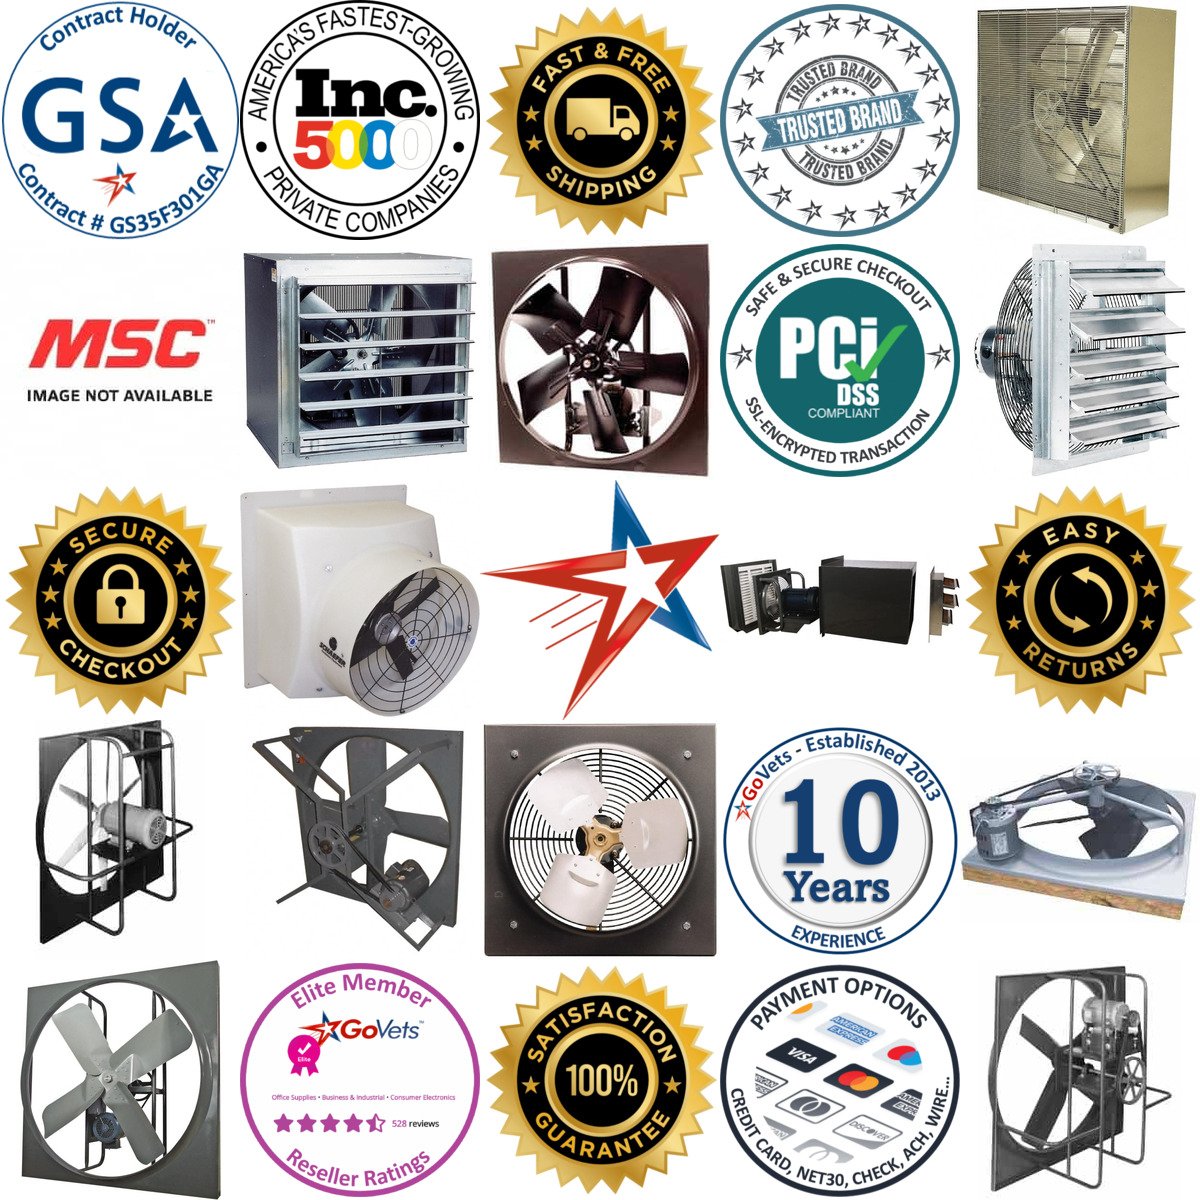 A selection of Exhaust Fans products on GoVets